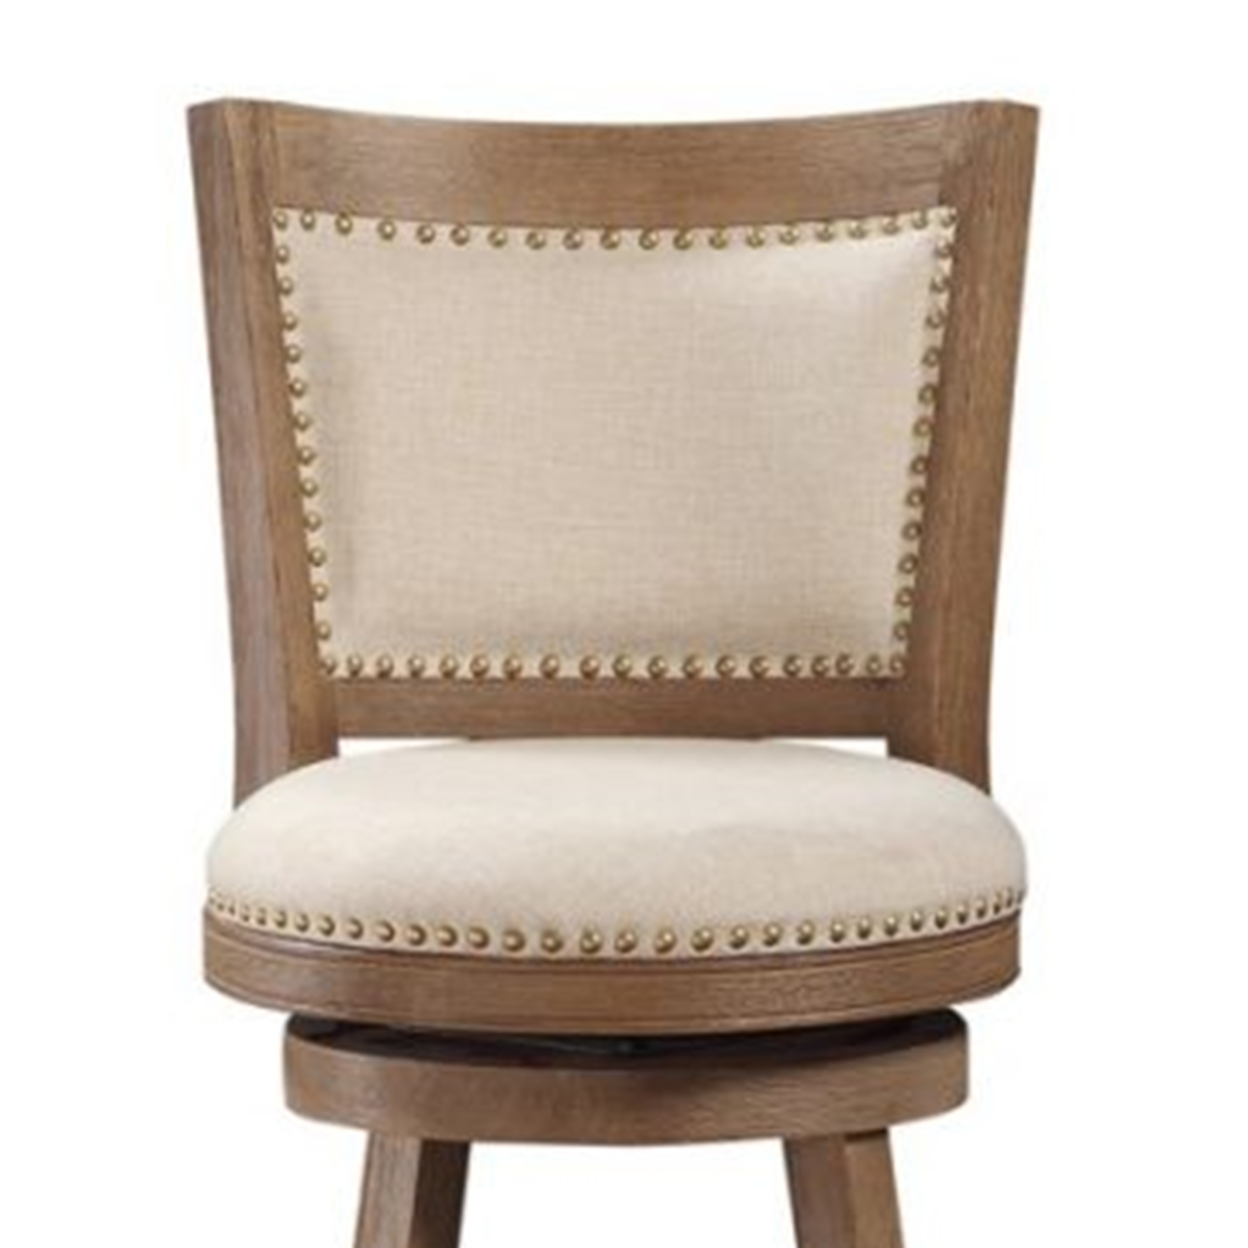 Nailhead Trim Round Barstool With Padded Seat And Back, Brown And Beige- Saltoro Sherpi